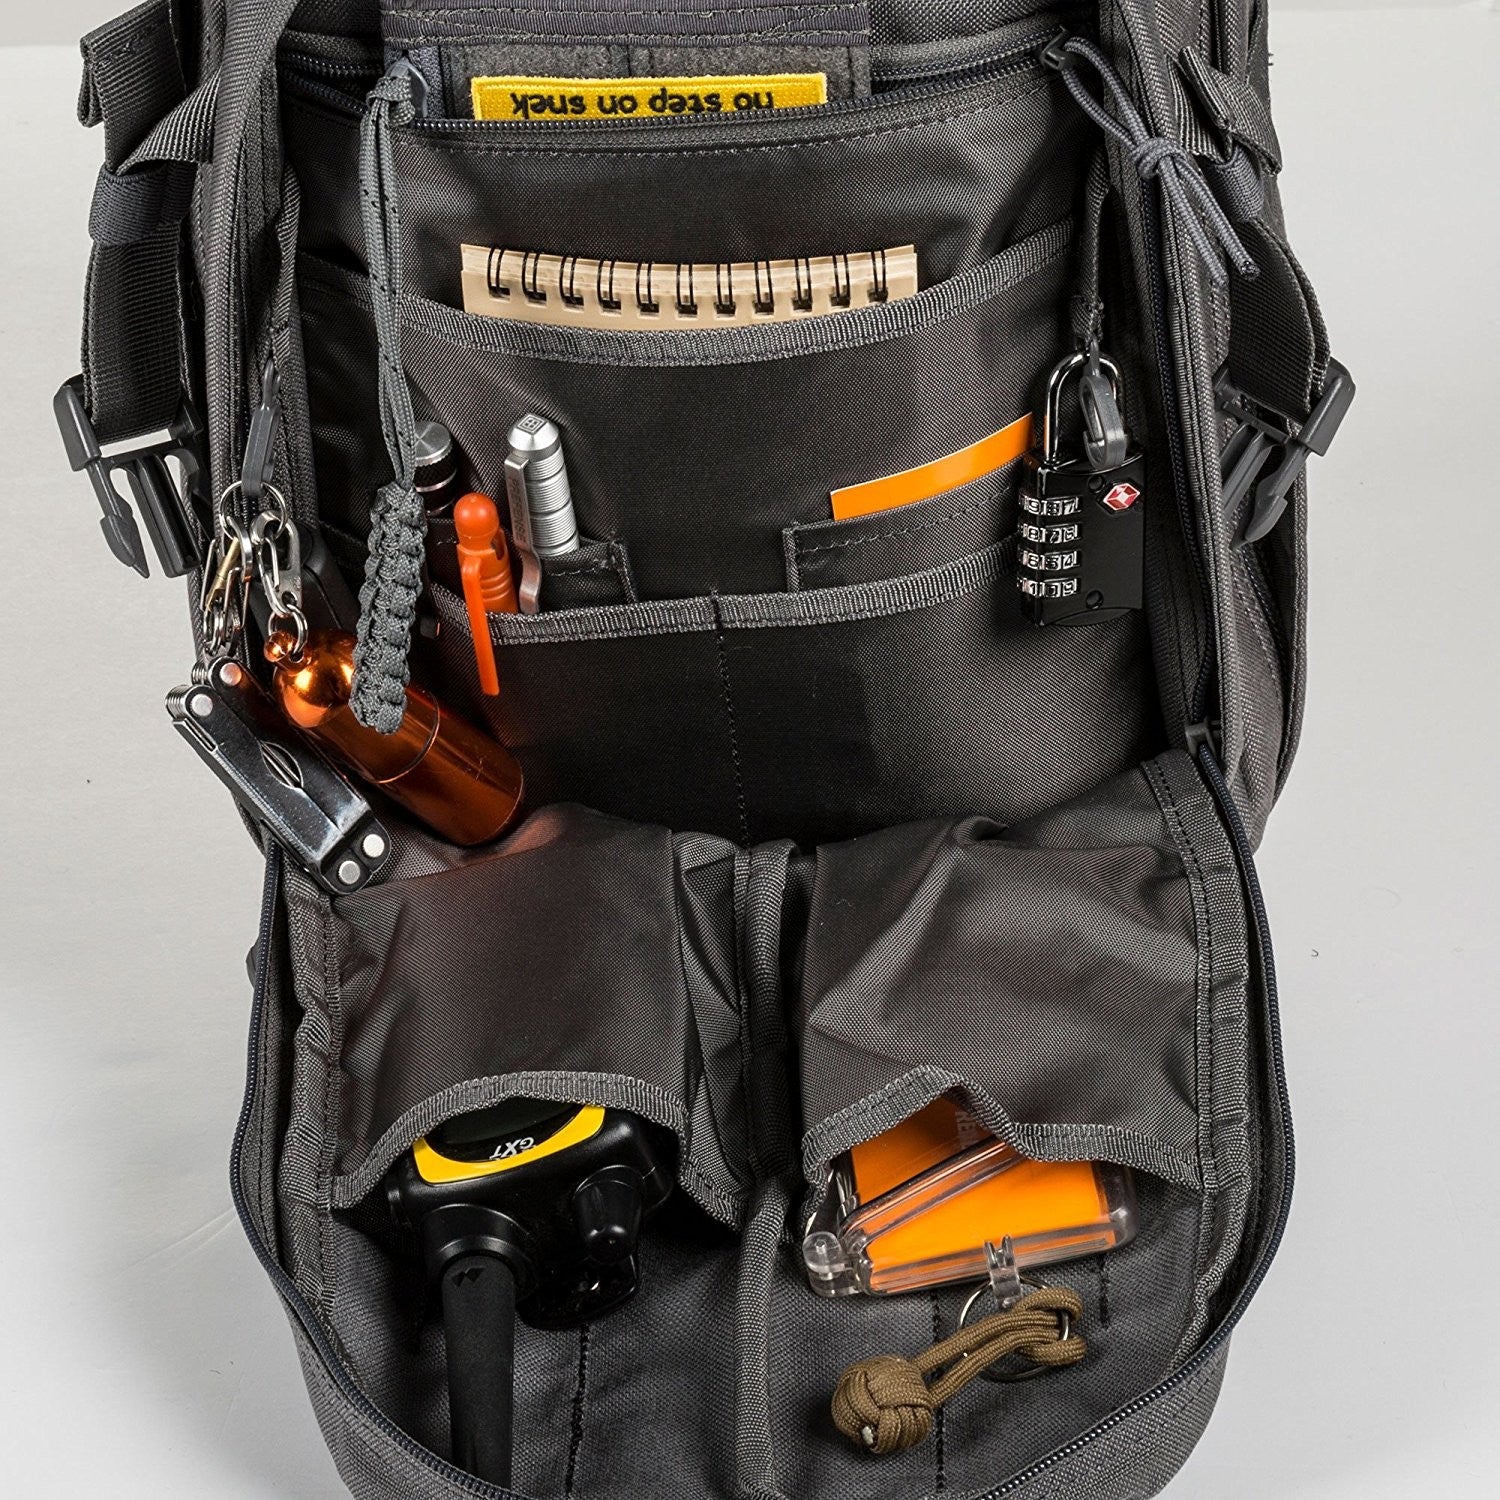 a back pack filled with tools and other items